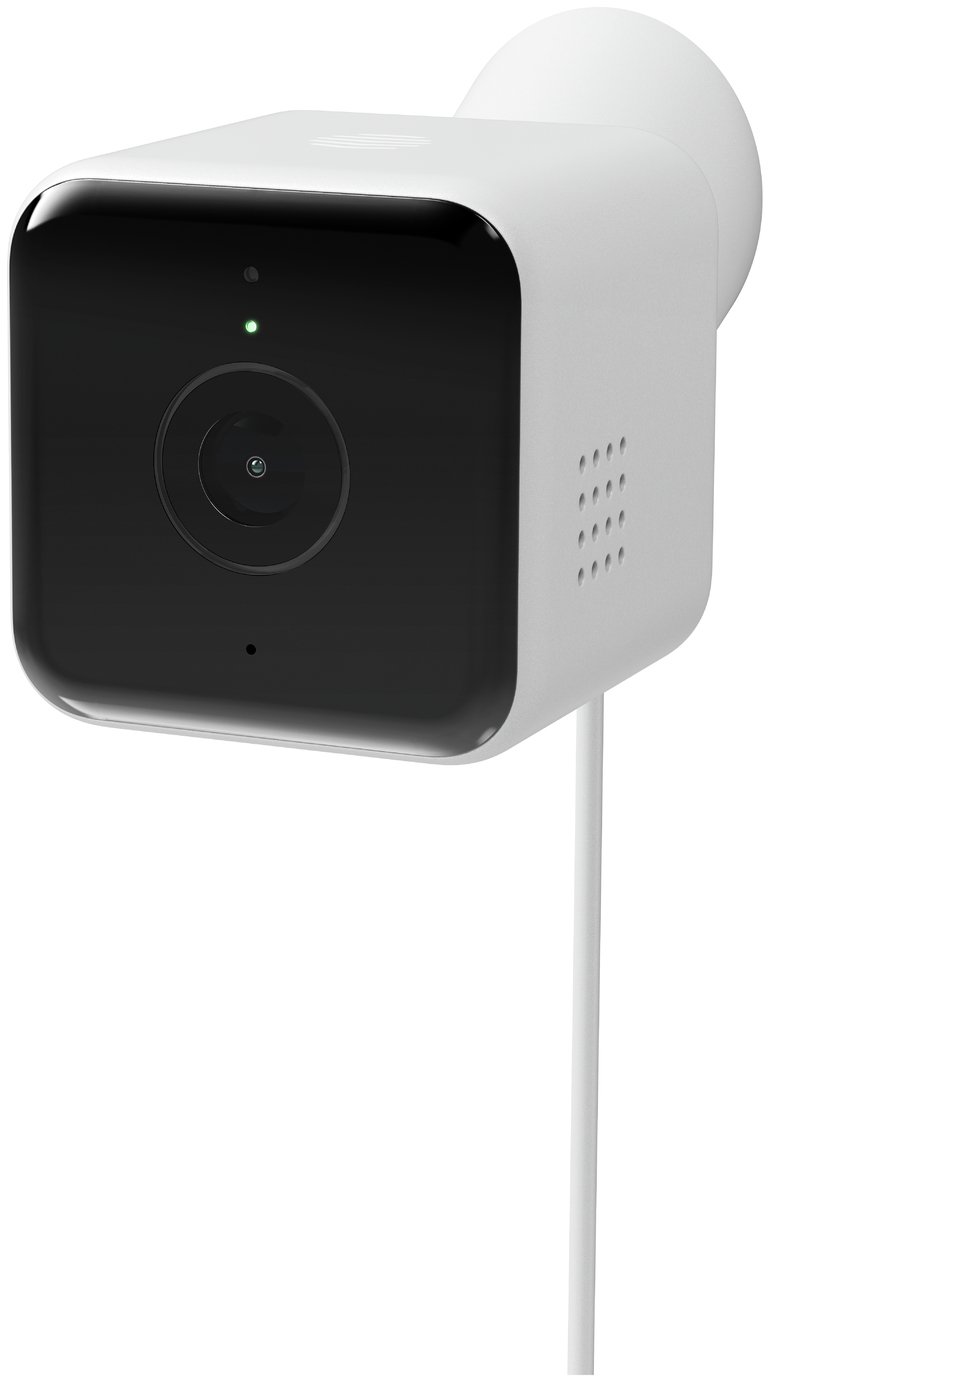 Hive View Outdoor Camera Review